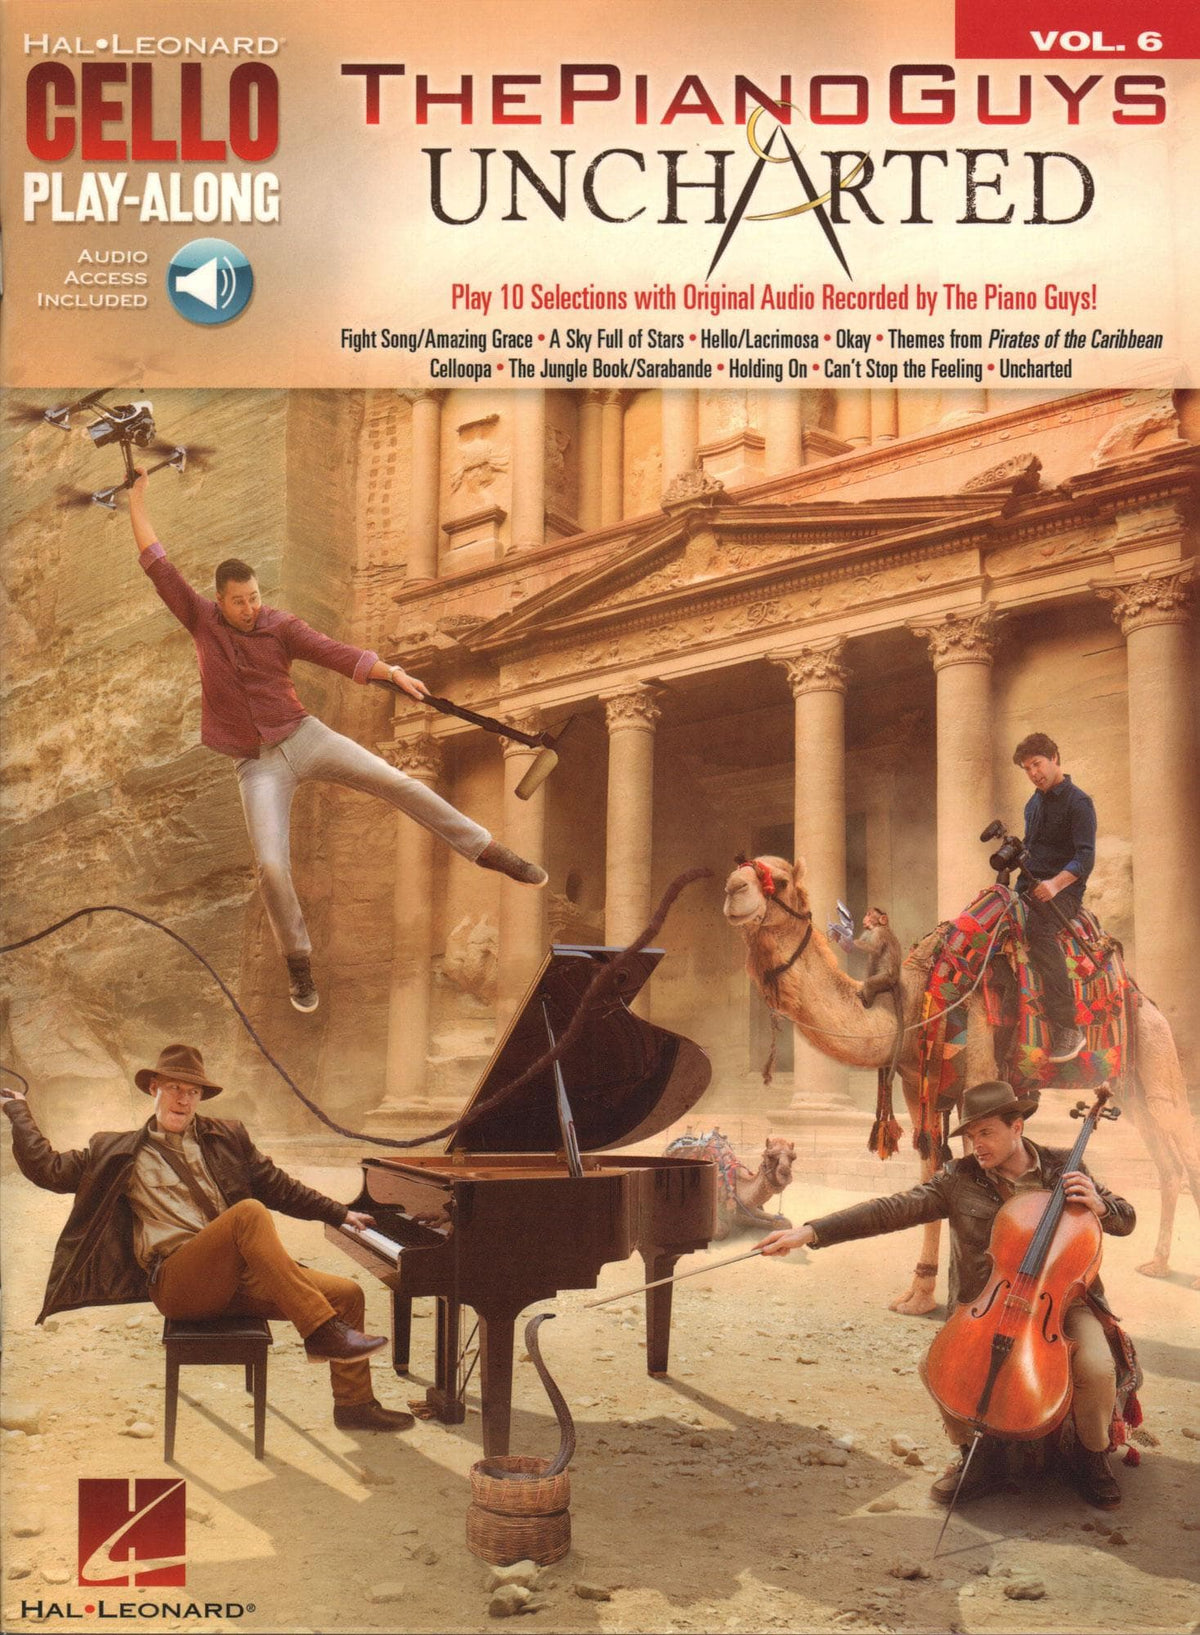 The Piano Guys Uncharted - Cello Play-Along Vol. 6 - 10 Selections - for Cello and Audio Accompaniment - Hal Leonard